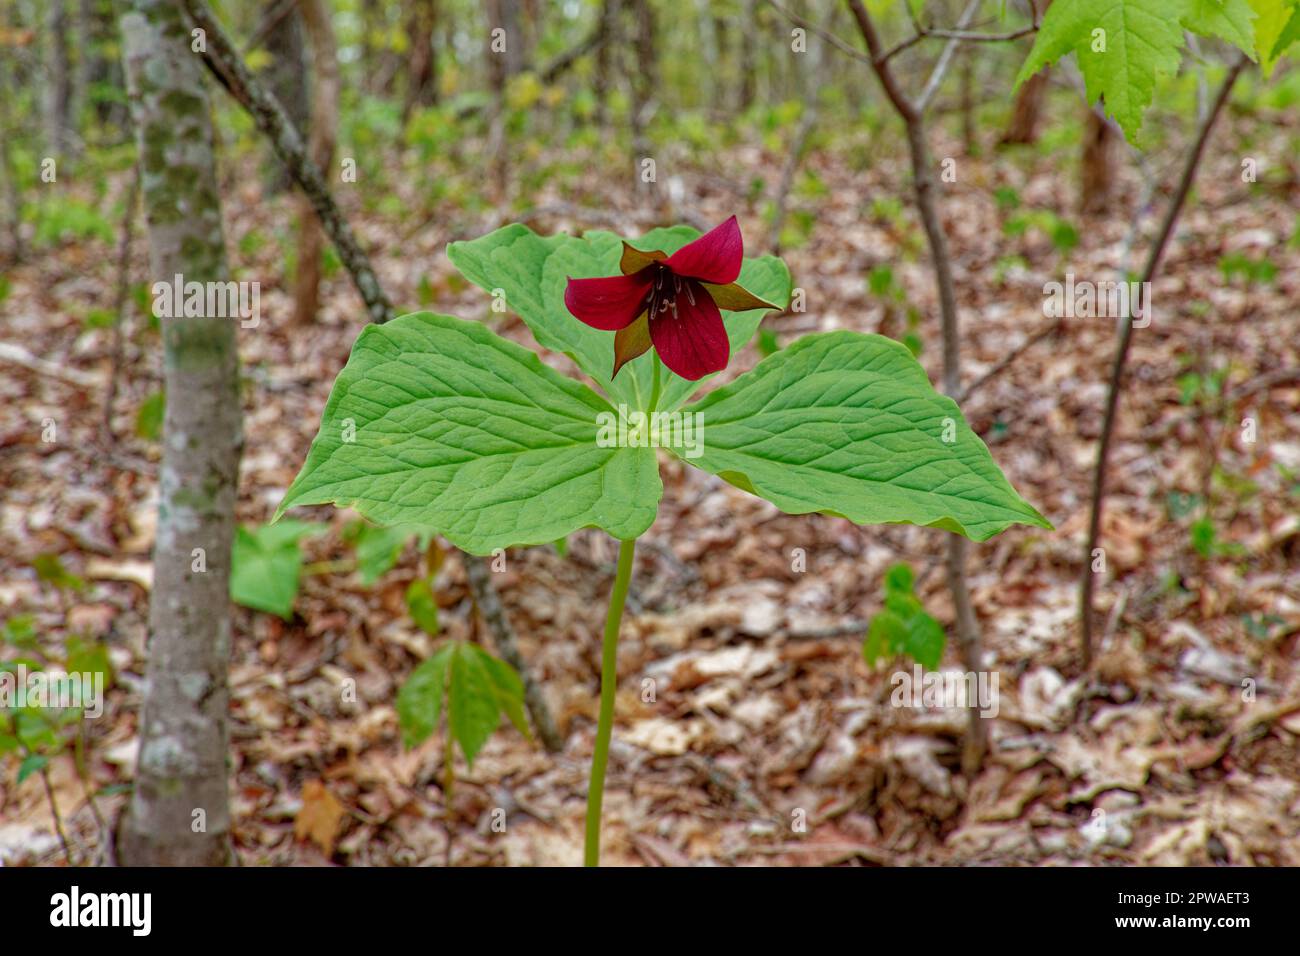 A single fully opened red trillium standing upright with a nodding red flower growing in the forest in the shade in springtime Stock Photo